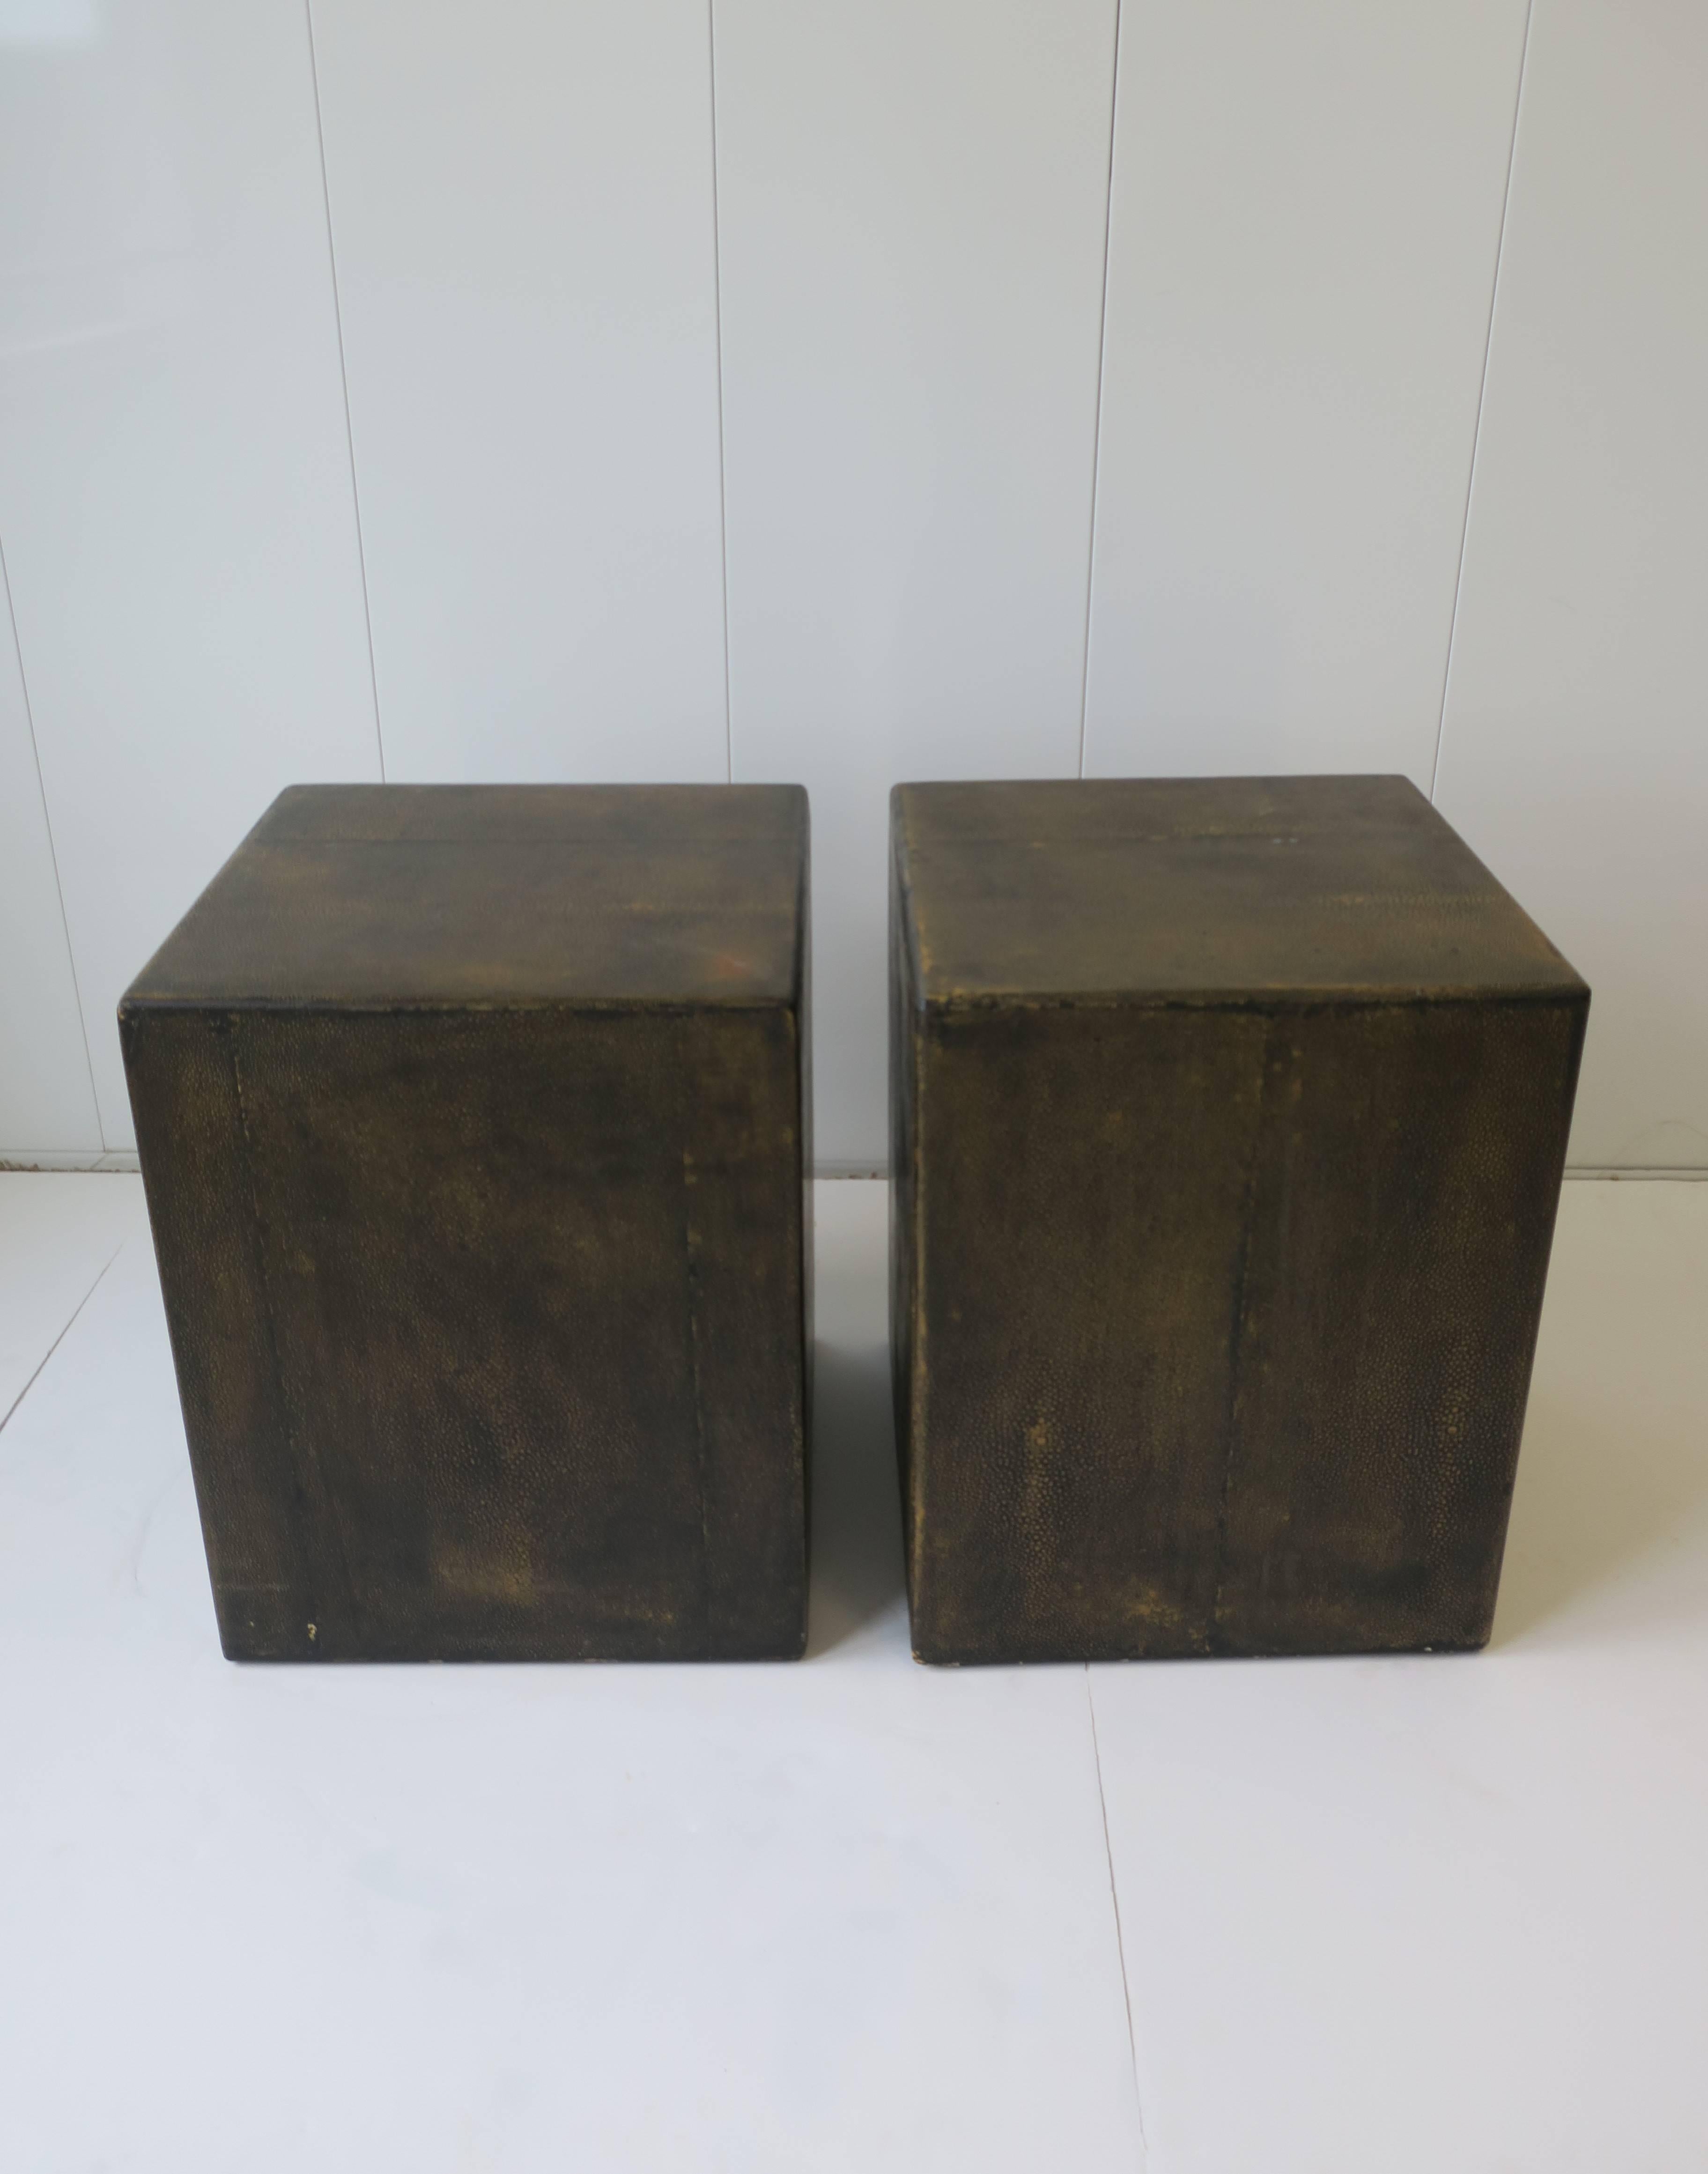 A vintage pair of Modern style Shagreen-esque pedestal end or side tables in black with a tan or gold undertone. Close-up in image #10. Measurements include: 15 inches square x 19 inches high. 

Pair available here online. By request, pair can be